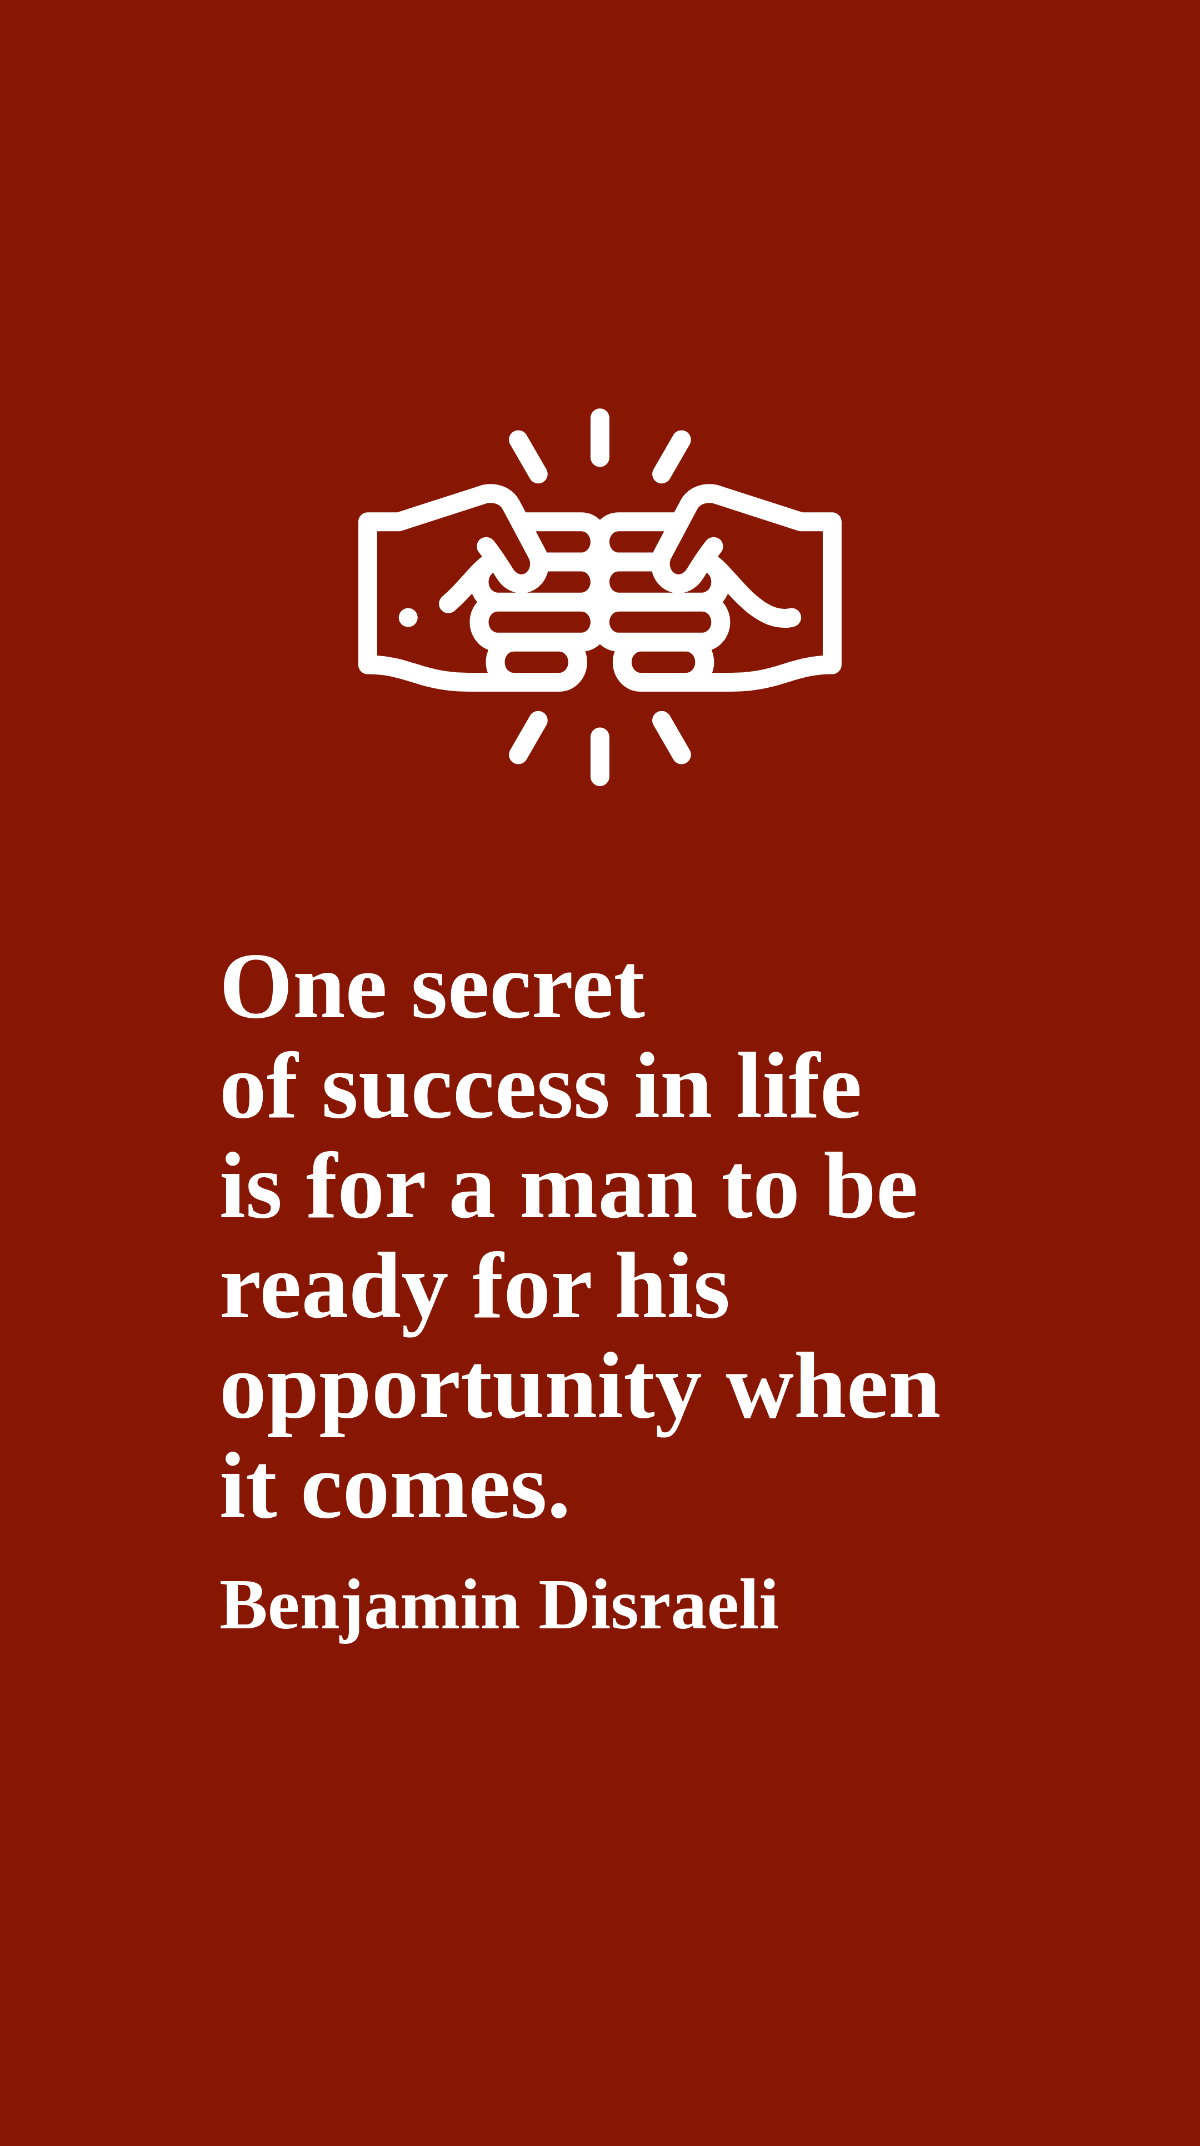 Benjamin Disraeli - One secret of success in life is for a man to be ready for his opportunity when it comes. Template